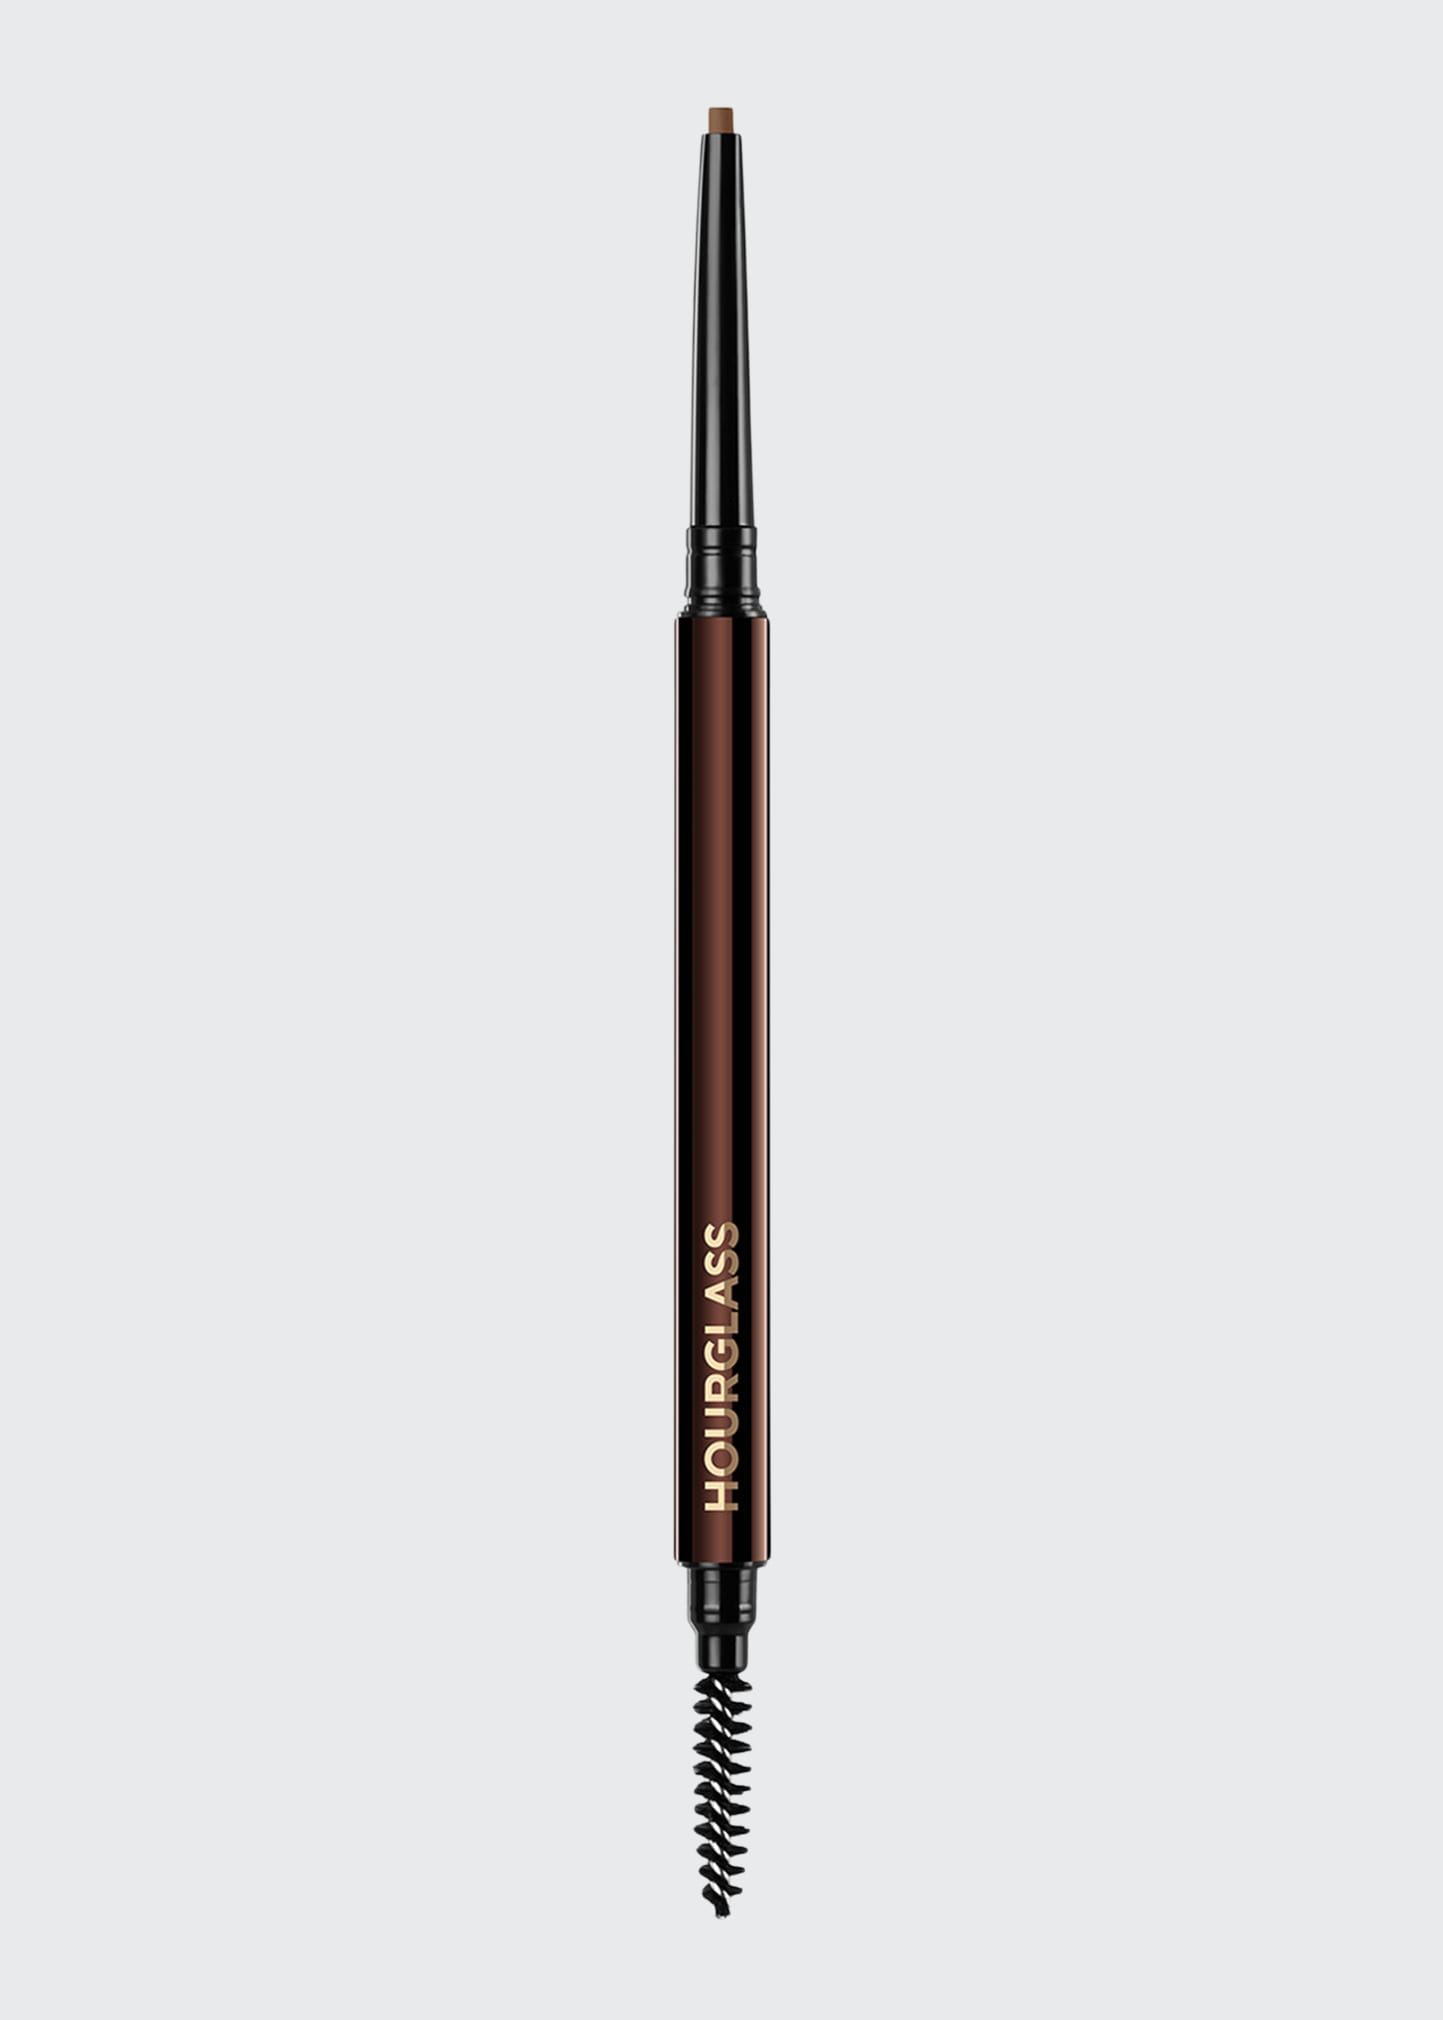 Hourglass Cosmetics Arch Brow Micro Sculpting Pencil